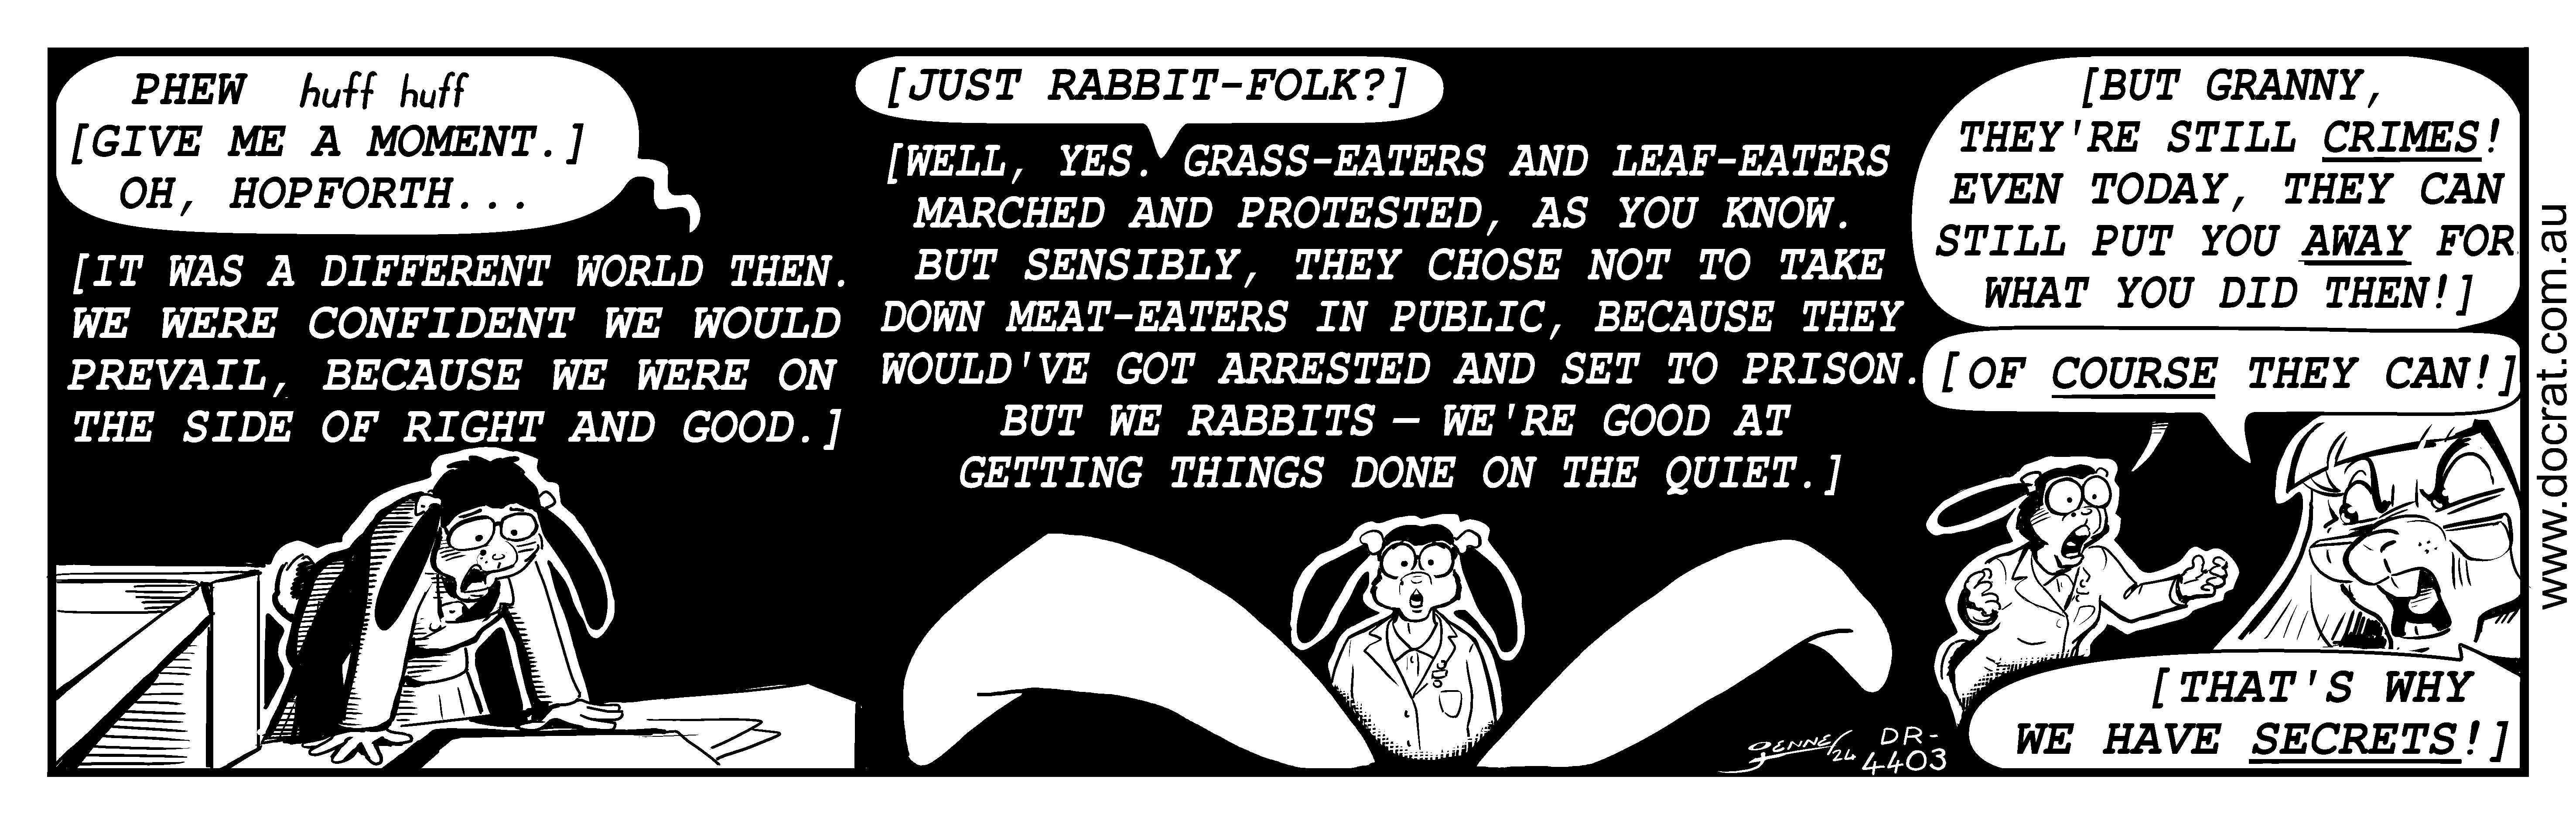 The secret truth how rabbits get things done